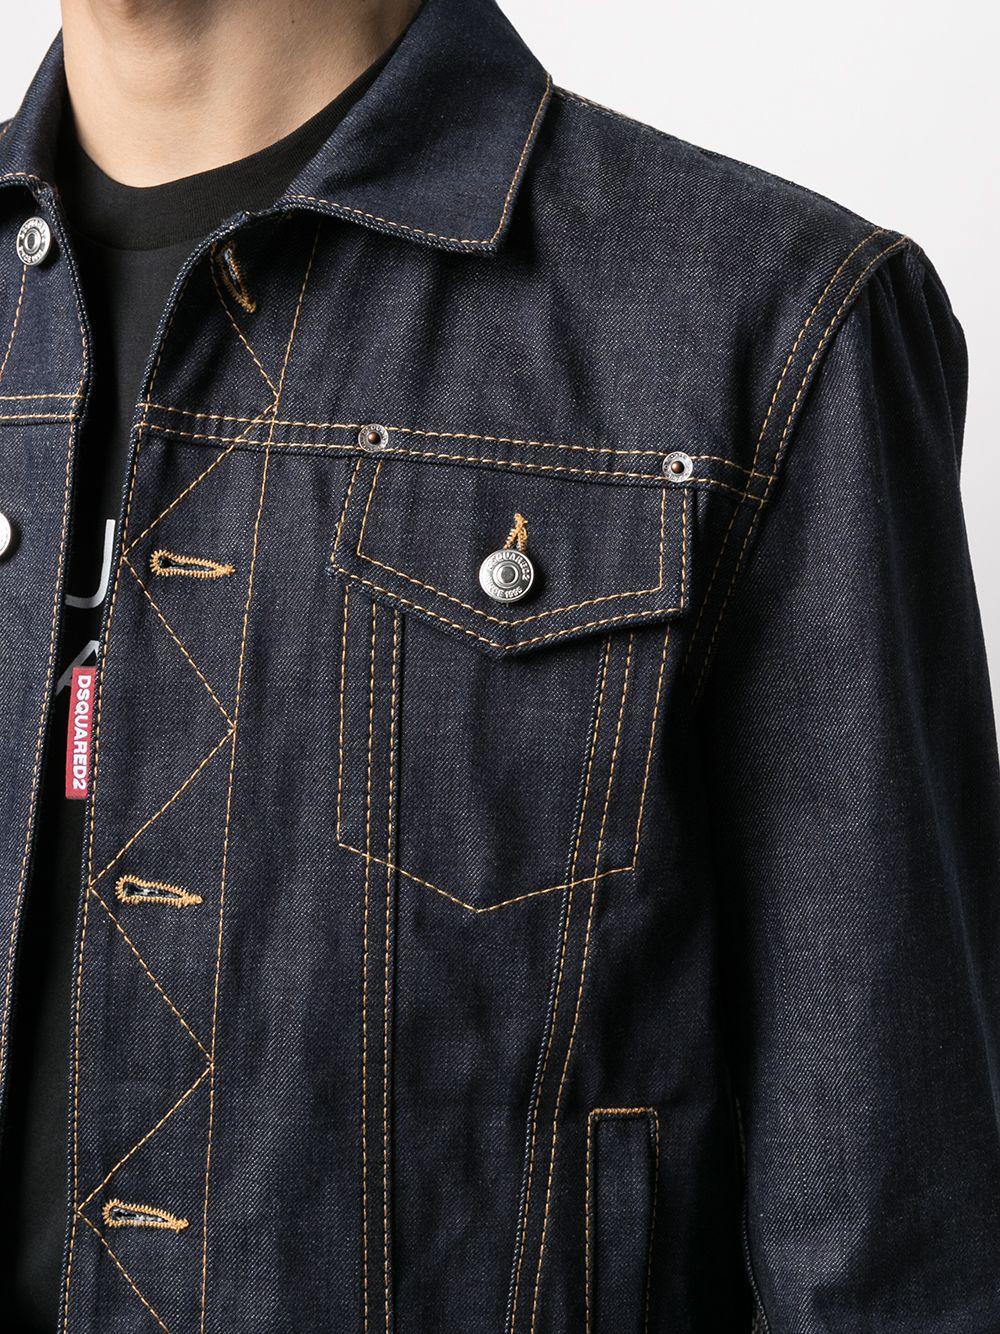 DSquared² Contrast-stitching Denim Jacket in Blue for Men - Lyst